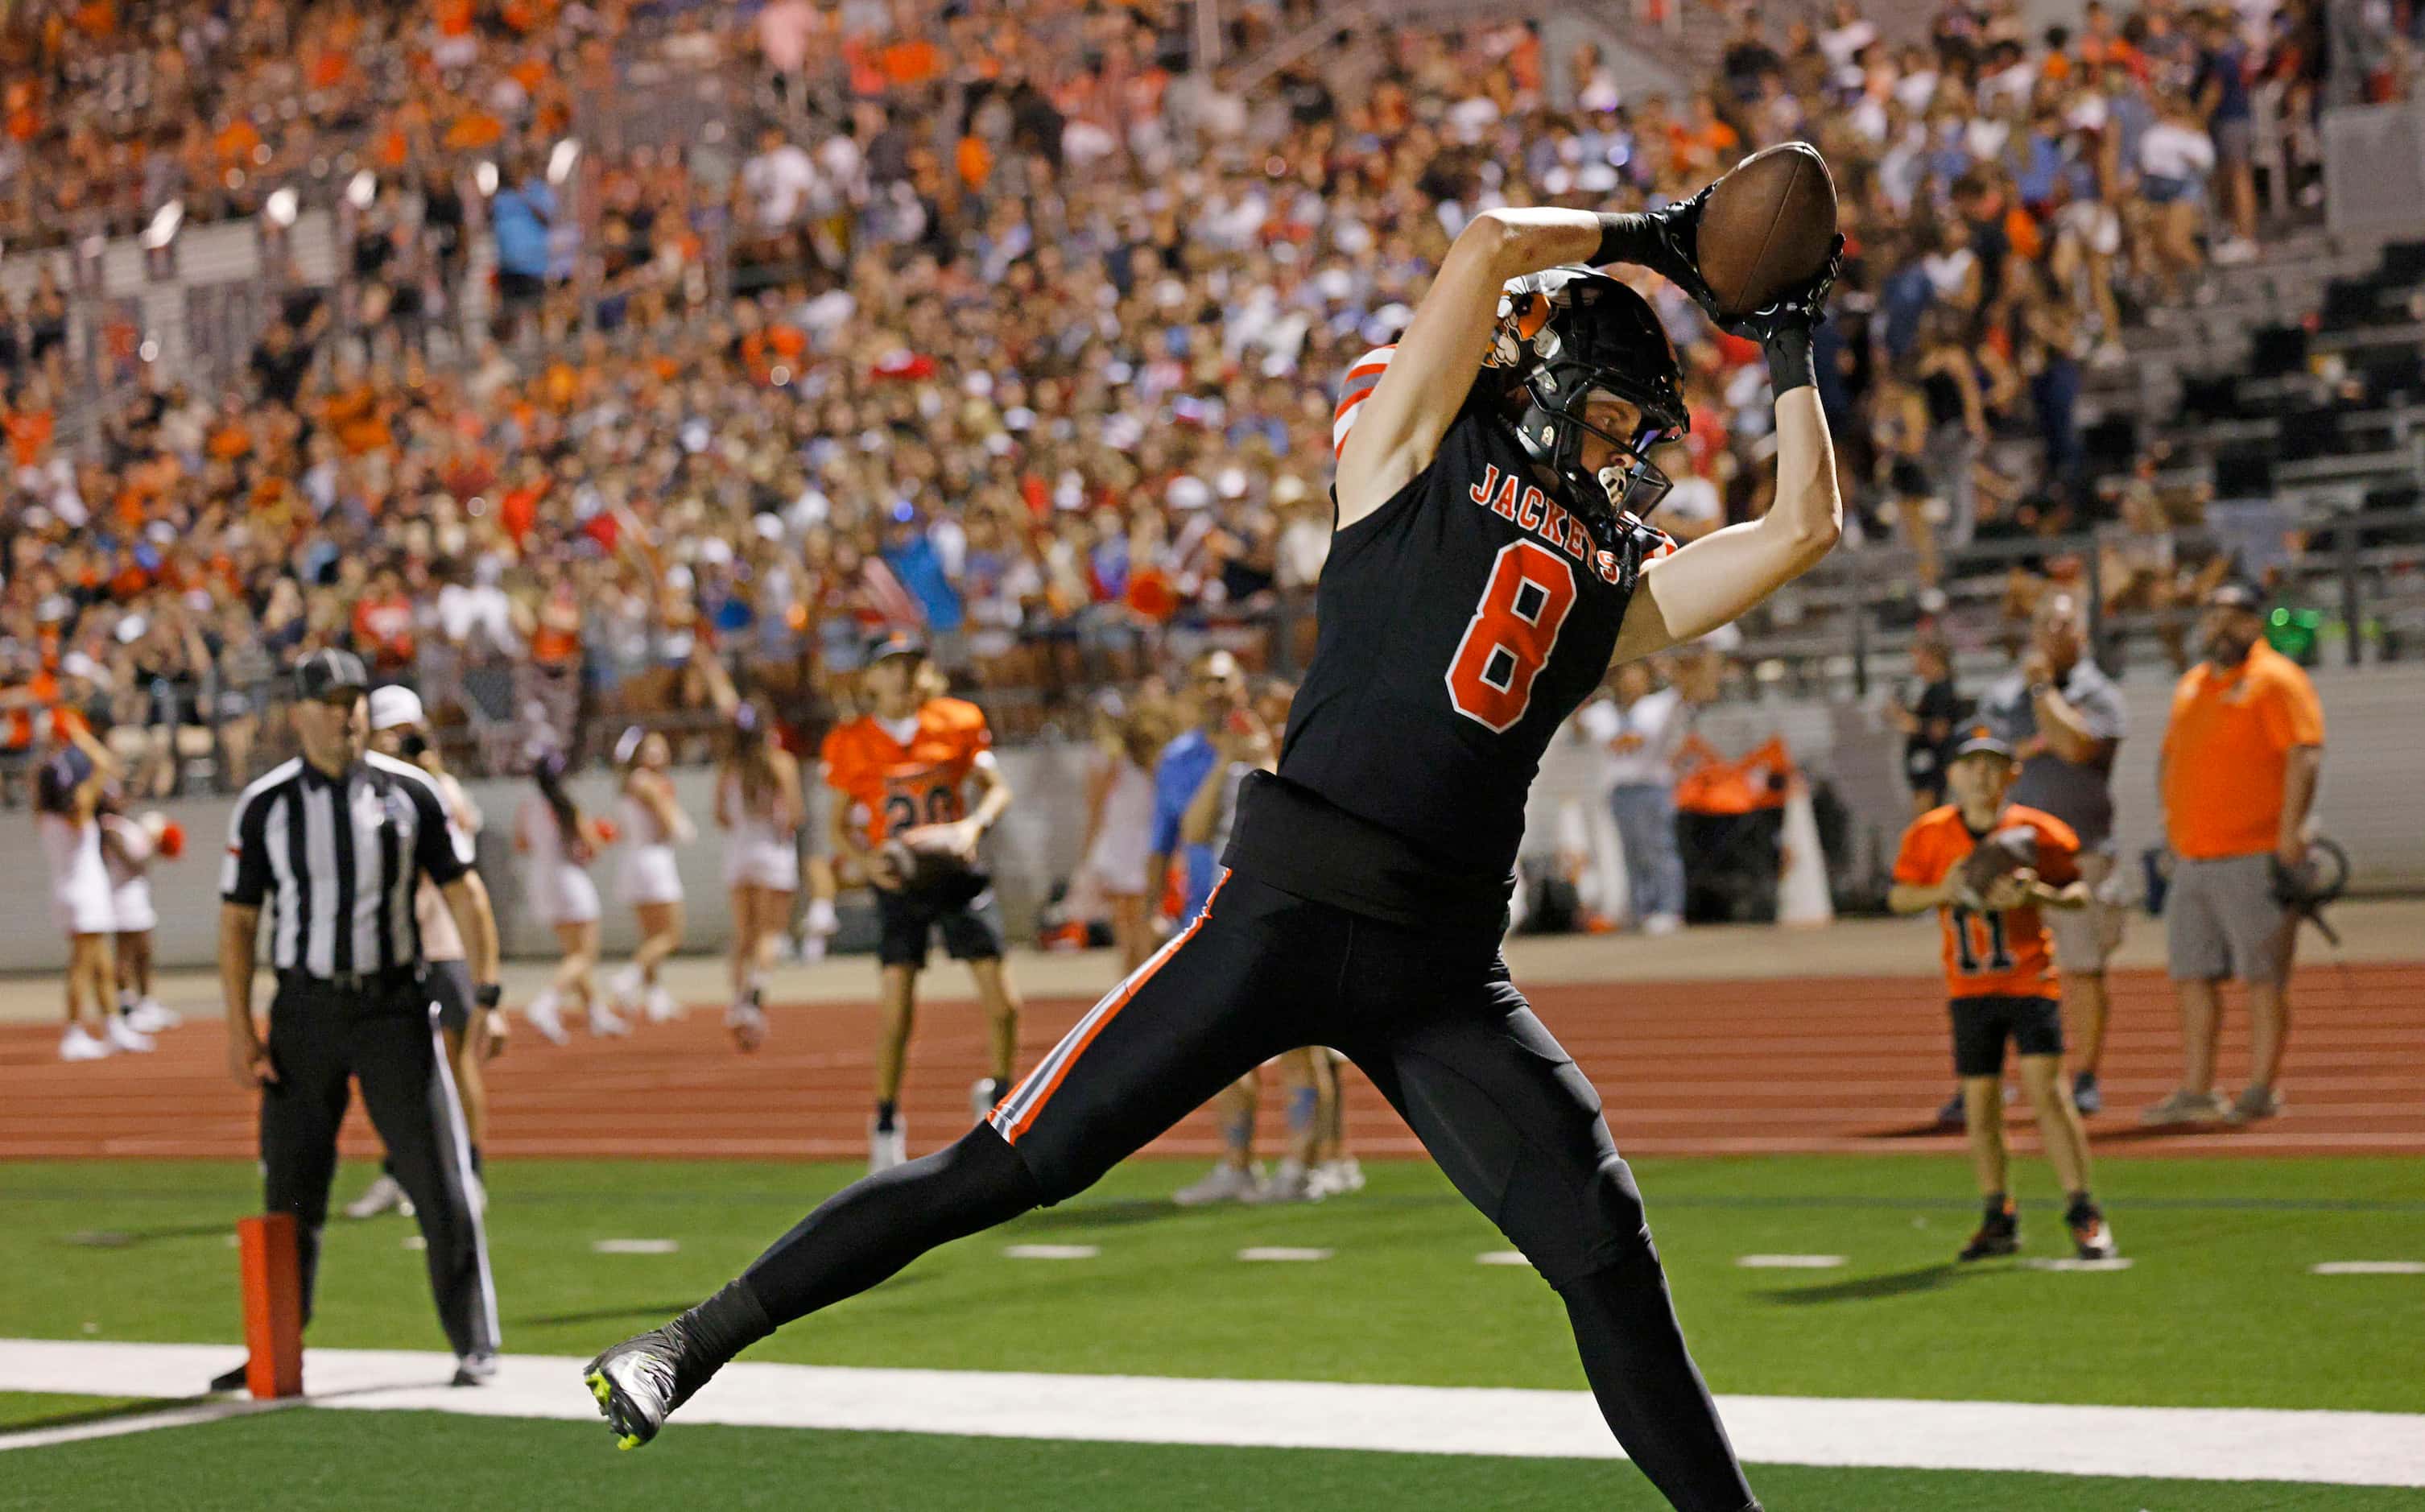 Rockwall's Tristan Gooch (8) catches a pass to score during the first half of a high school...